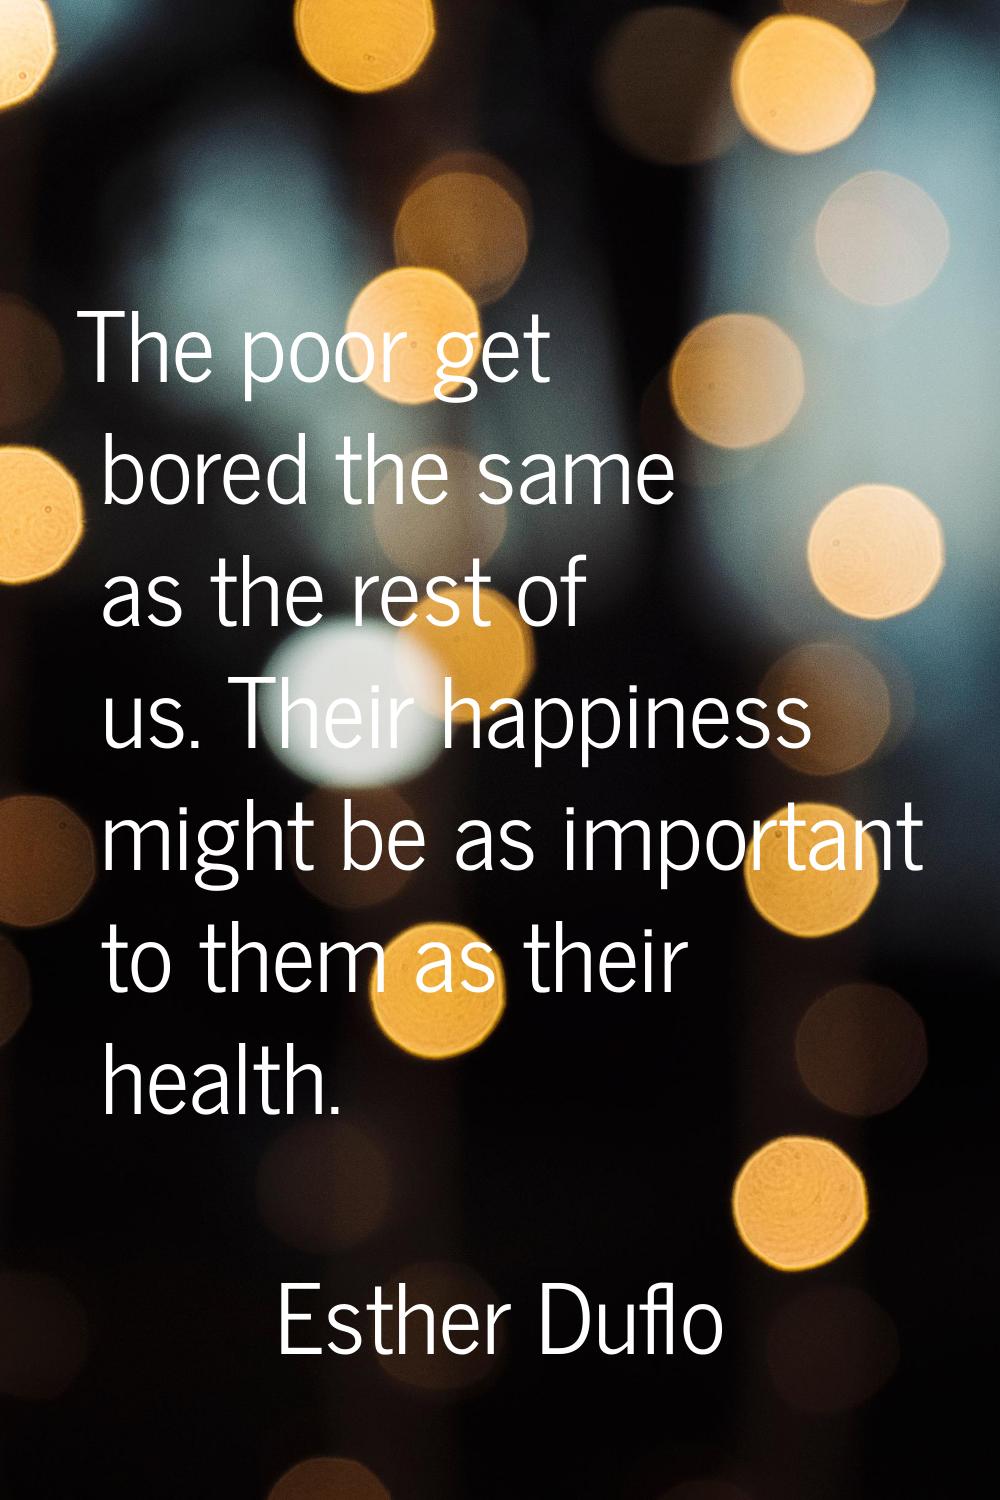 The poor get bored the same as the rest of us. Their happiness might be as important to them as the